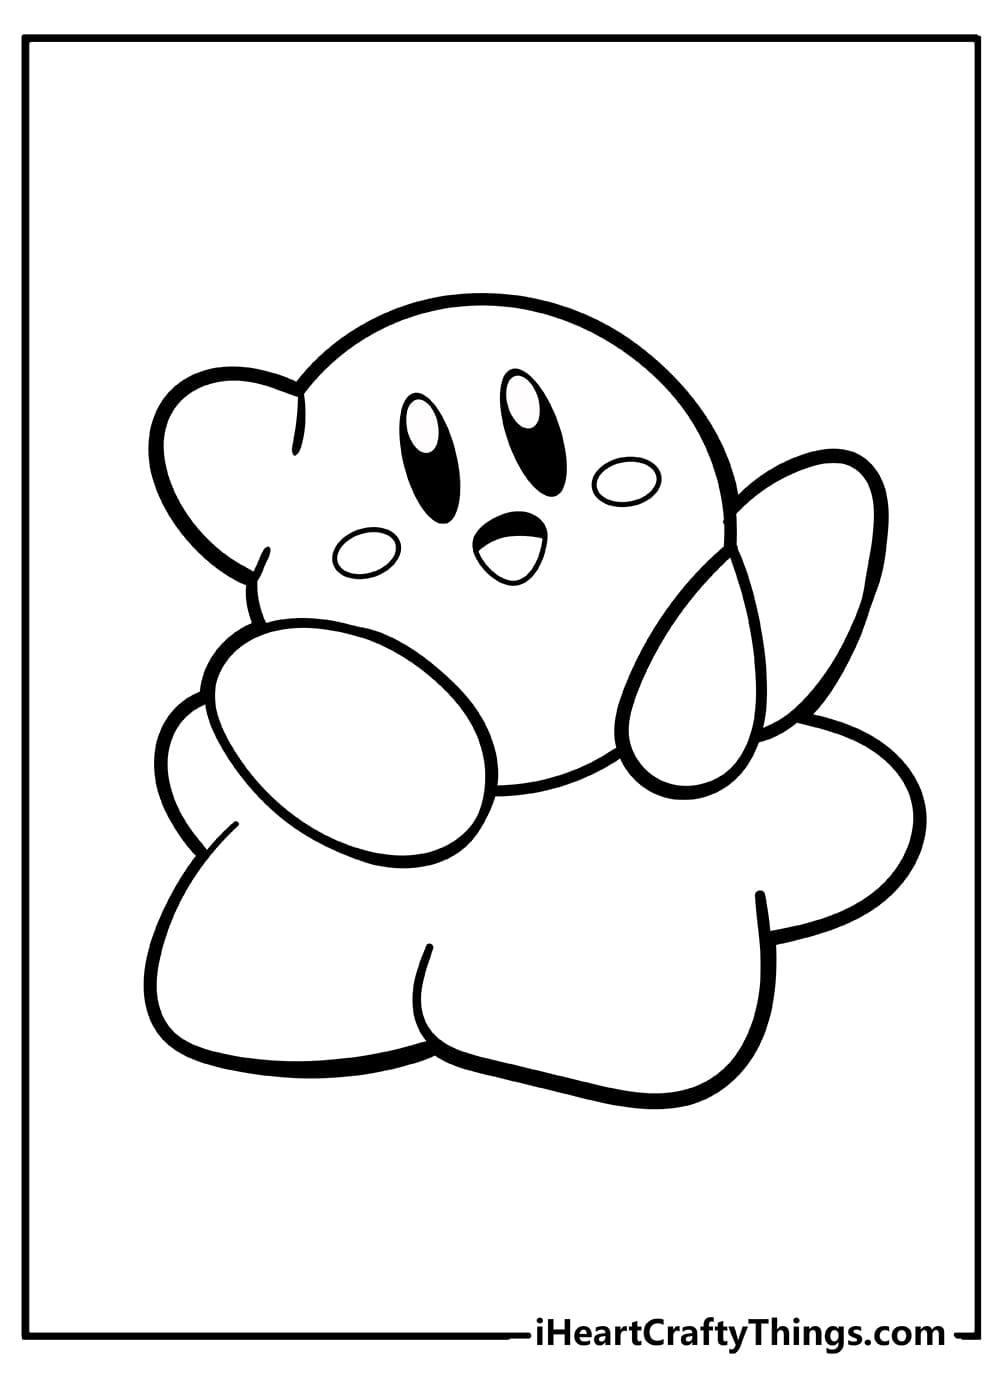 Cute Kirby Image For Kids